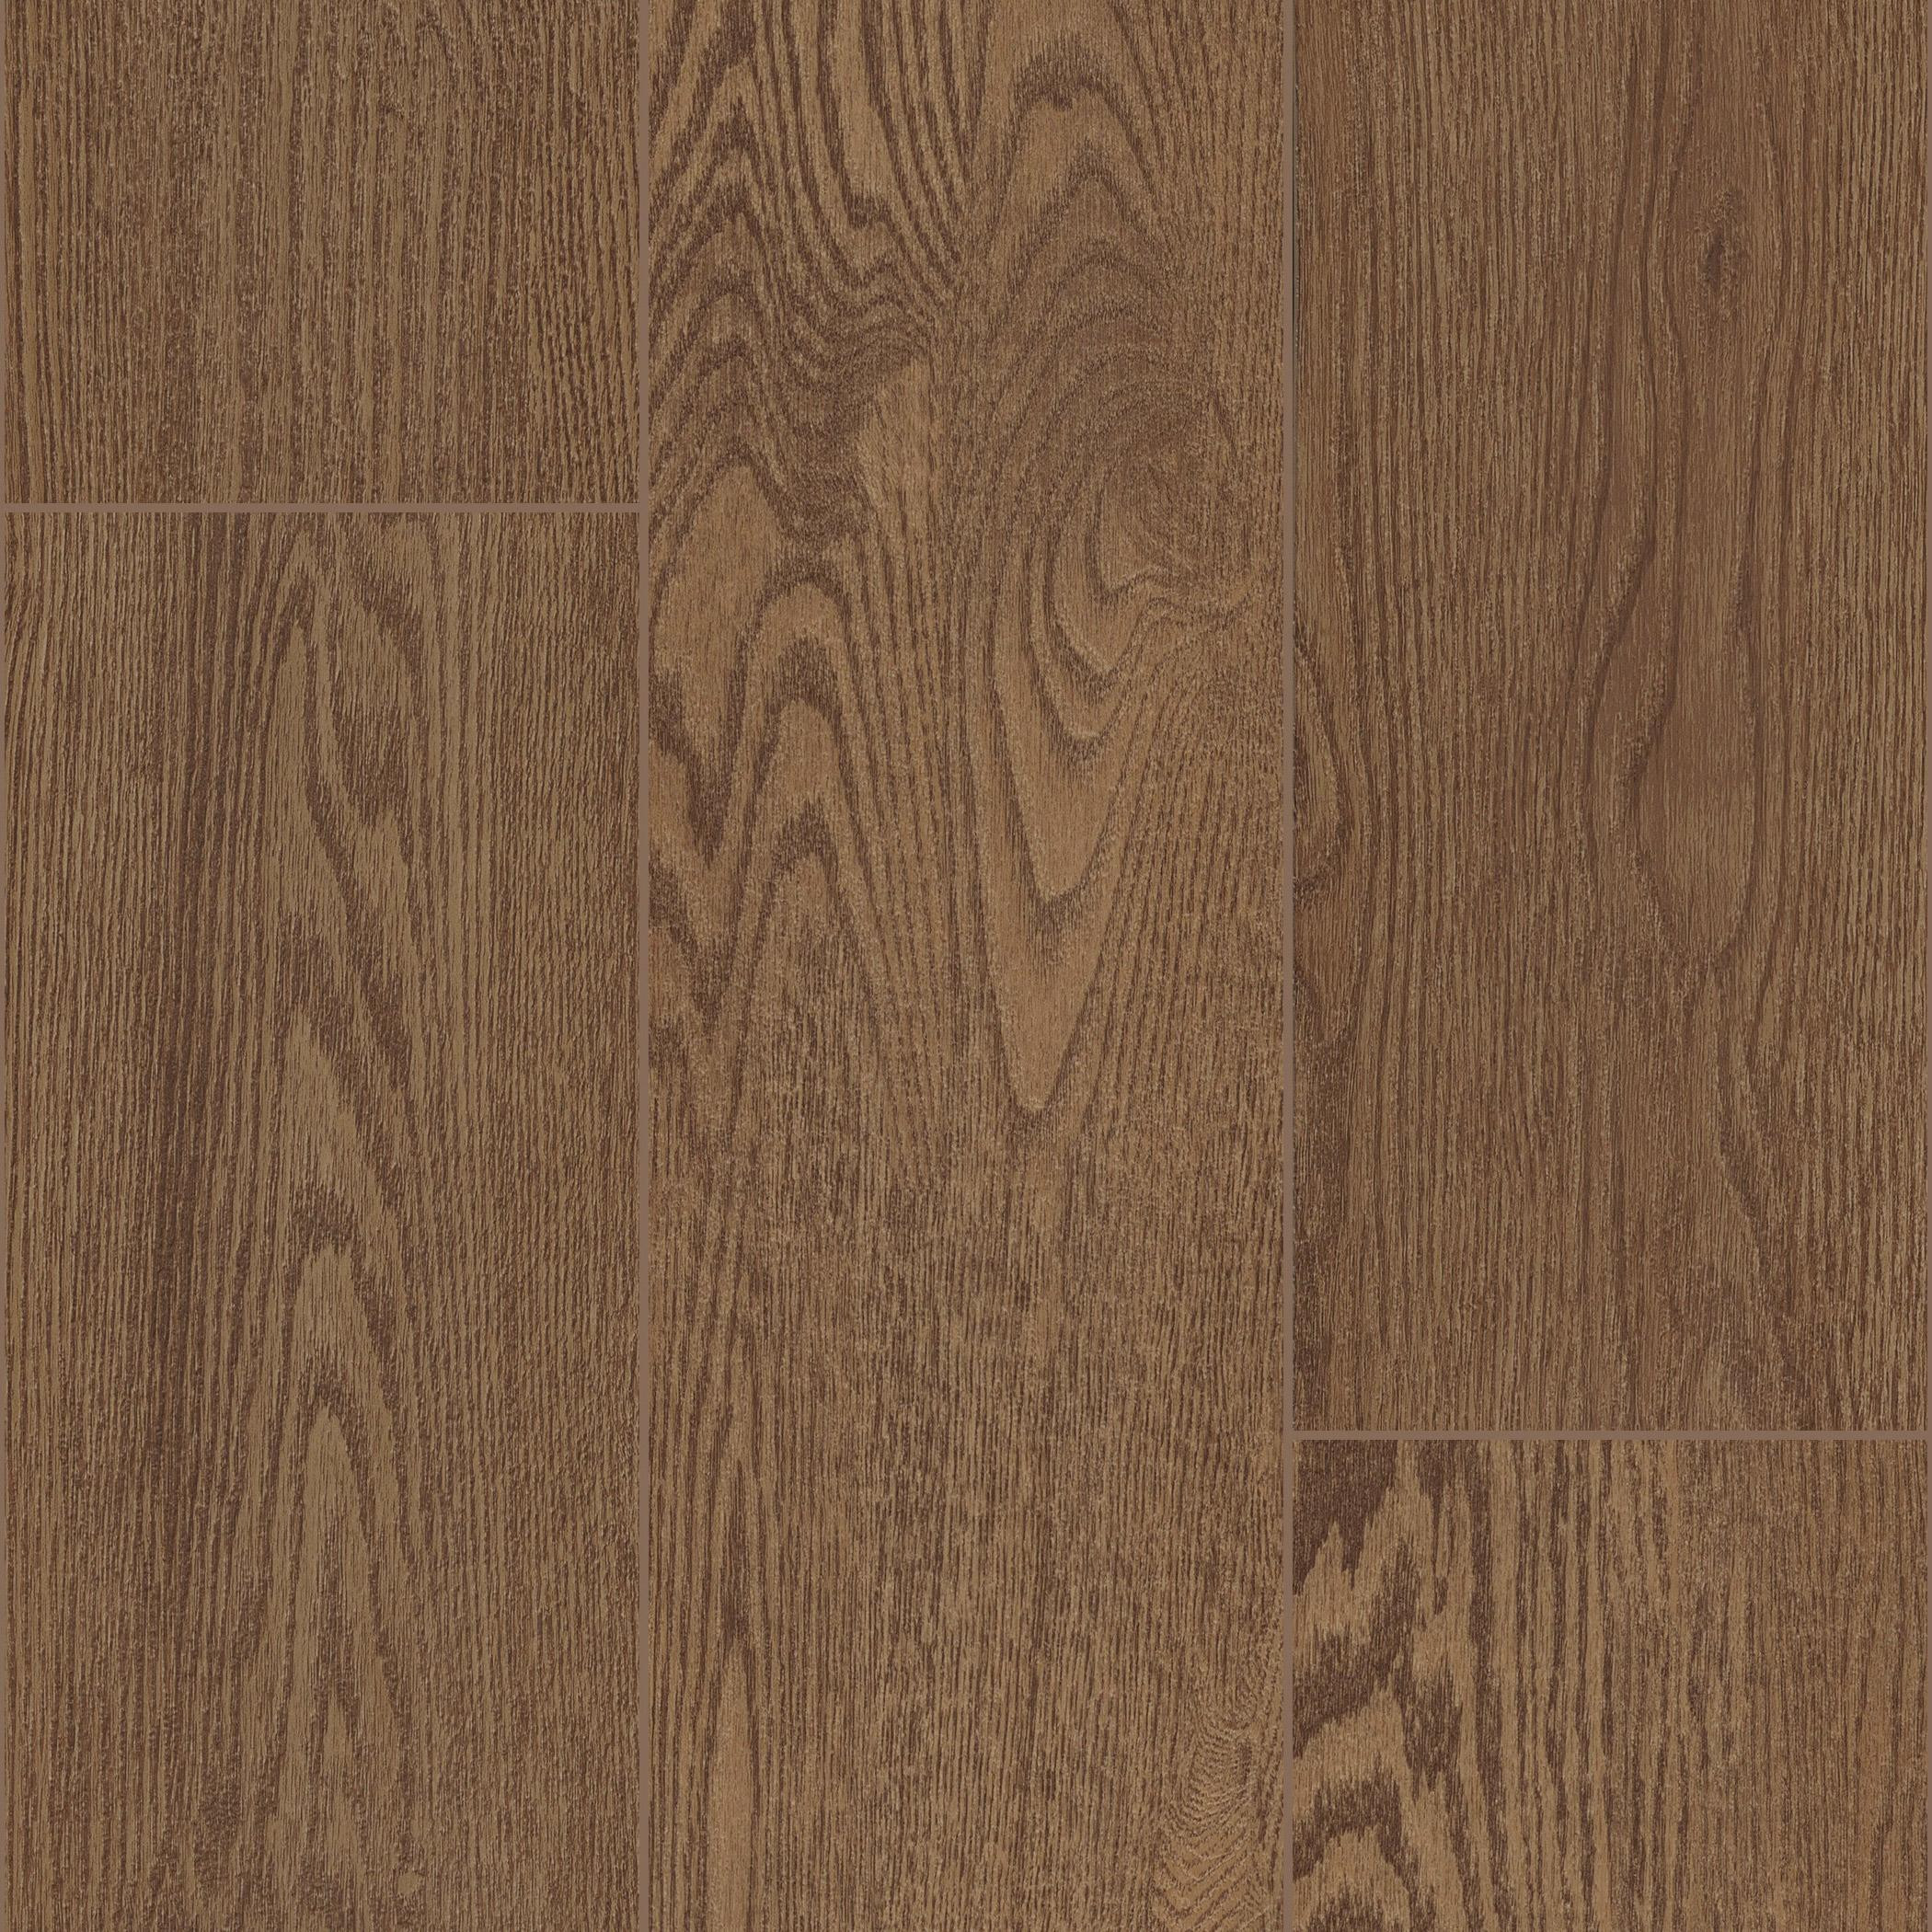 23 Cute Mohawk Hardwood Flooring Care 2024 free download mohawk hardwood flooring care of mohawk golden haze 7 wide glue down luxury vinyl plank flooring in 542 7 x 70 55 approved all i did was use some brightness